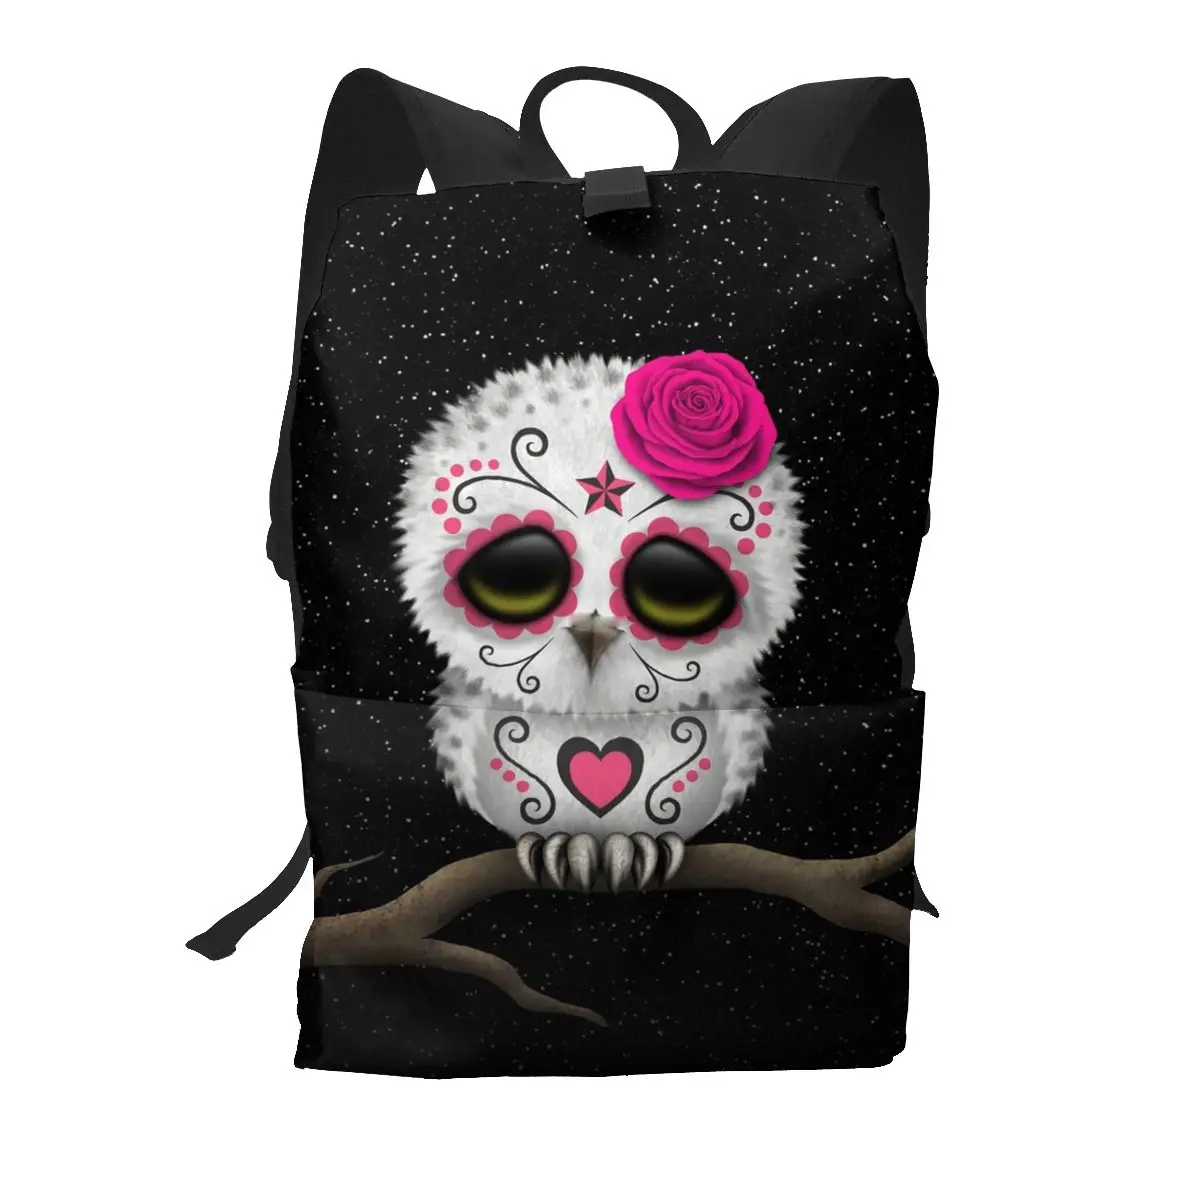 

Cute Pink Day Of The Dead Sugar Skull Owl Backpacks Mexican Skull Animal School Tourist Large Backpack Universal Polyester Bags